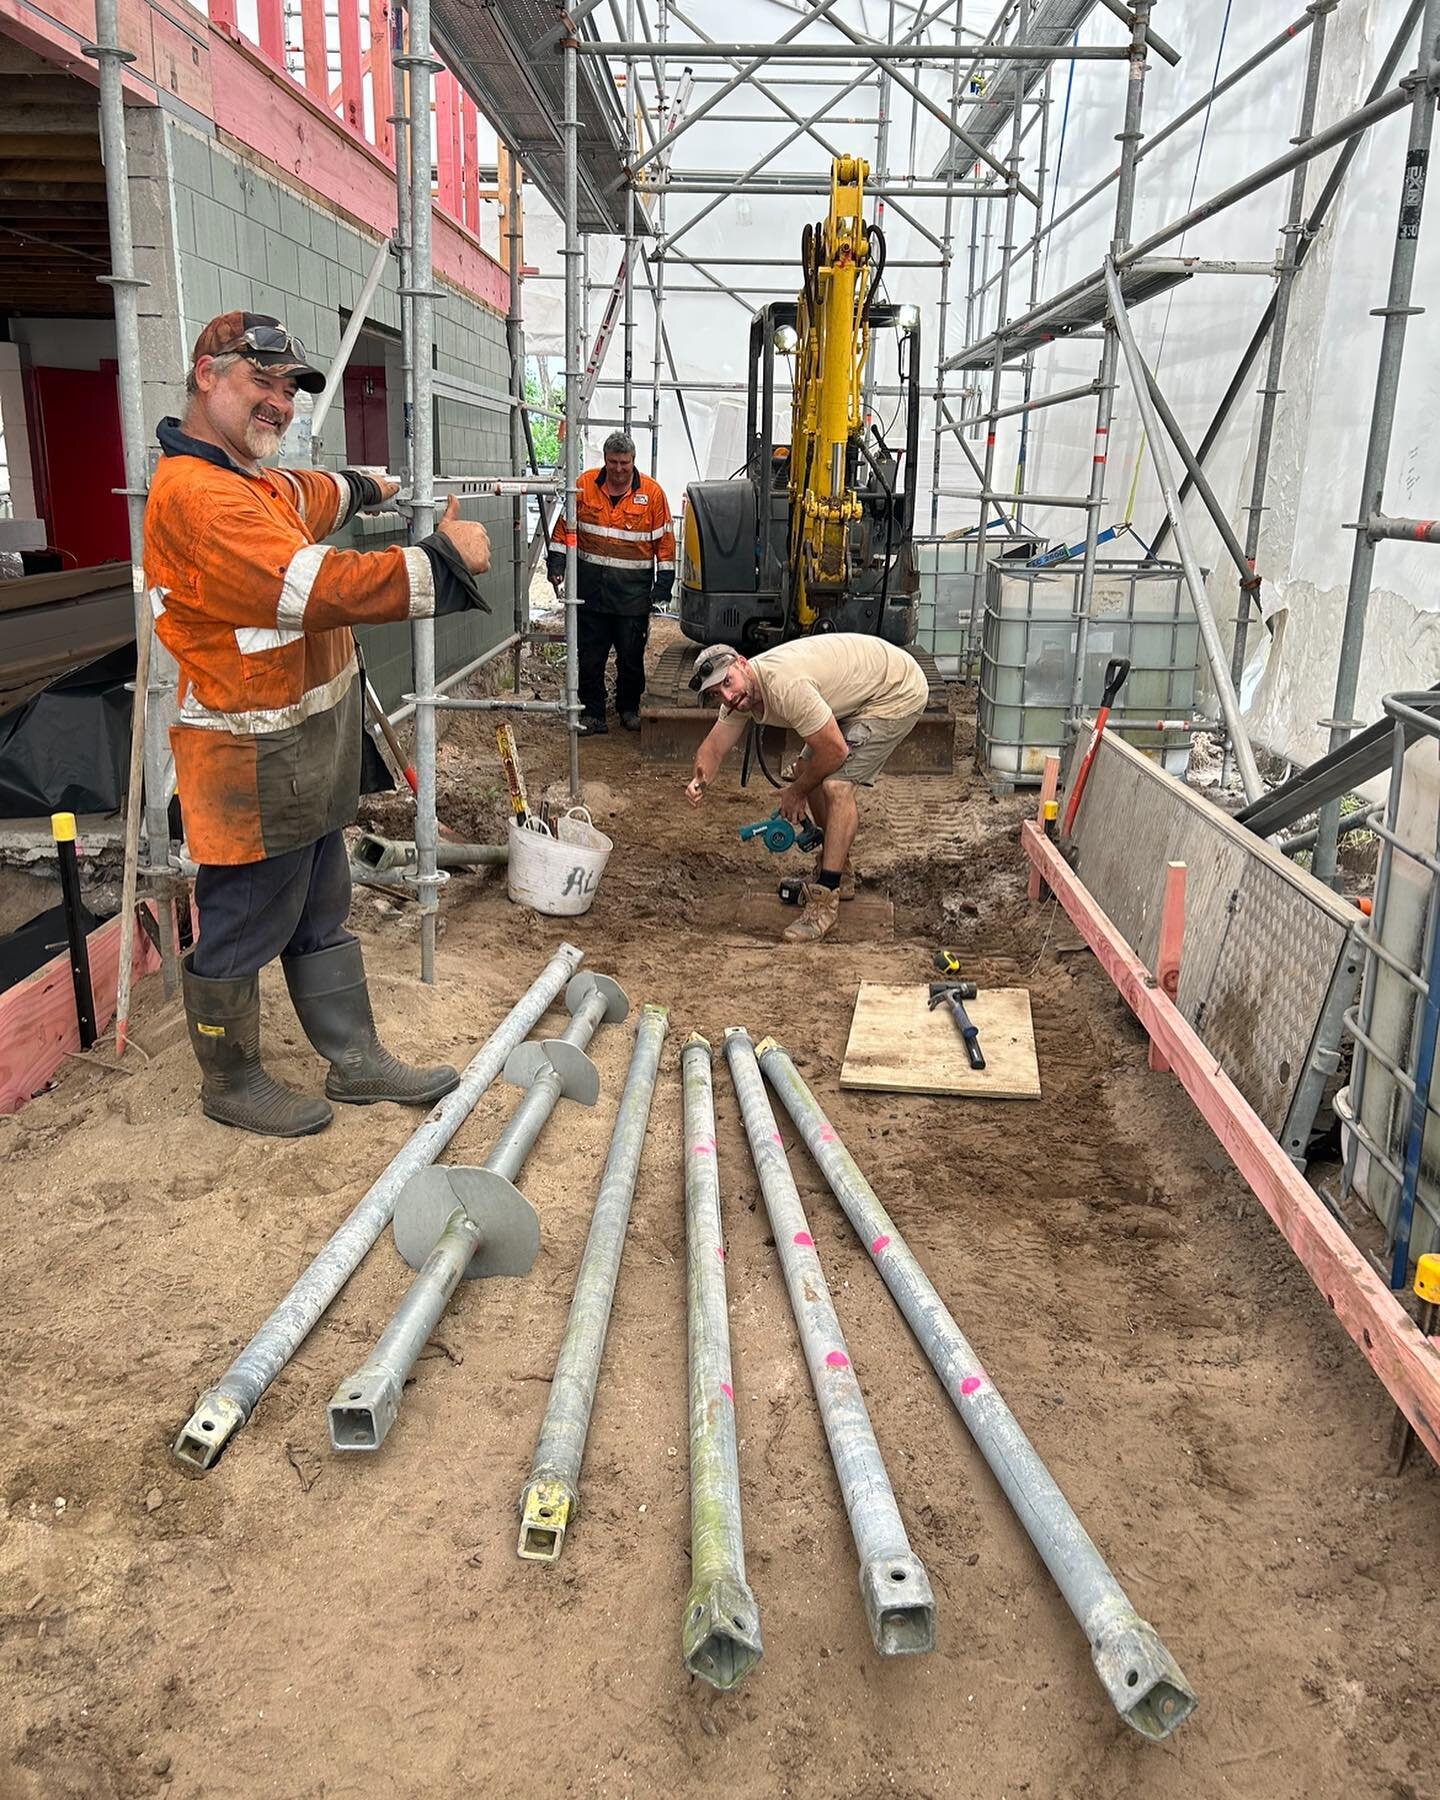 A new engineering solution experience for us on one of our Waihi Beach renovations, this is the last one to go in this morning of the 25, 13m deep galvanised steel, screw anchor piles, that go through the defective soil layers, down into solid ground